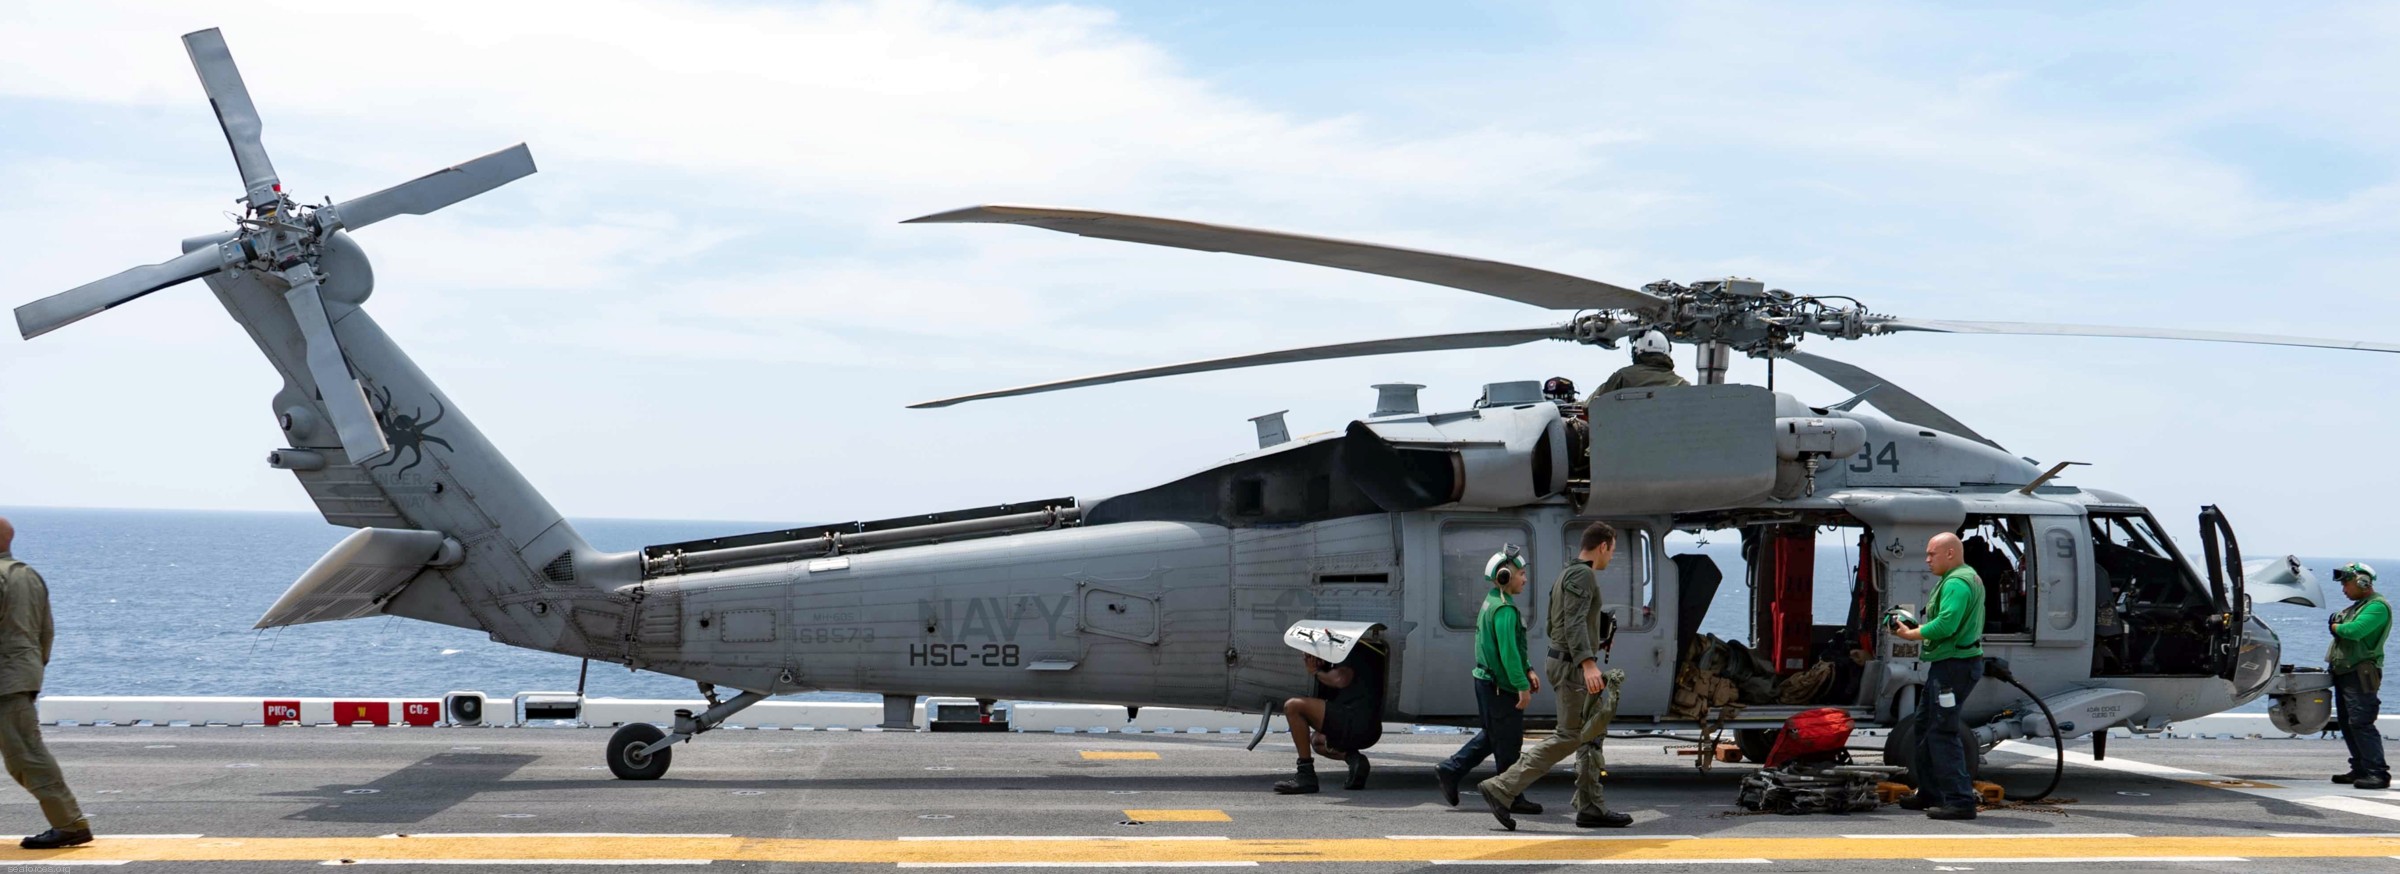 hsc-28 dragon whales helicopter sea combat squadron mh-60s seahawk us navy 188 lhd-5 uss bataan